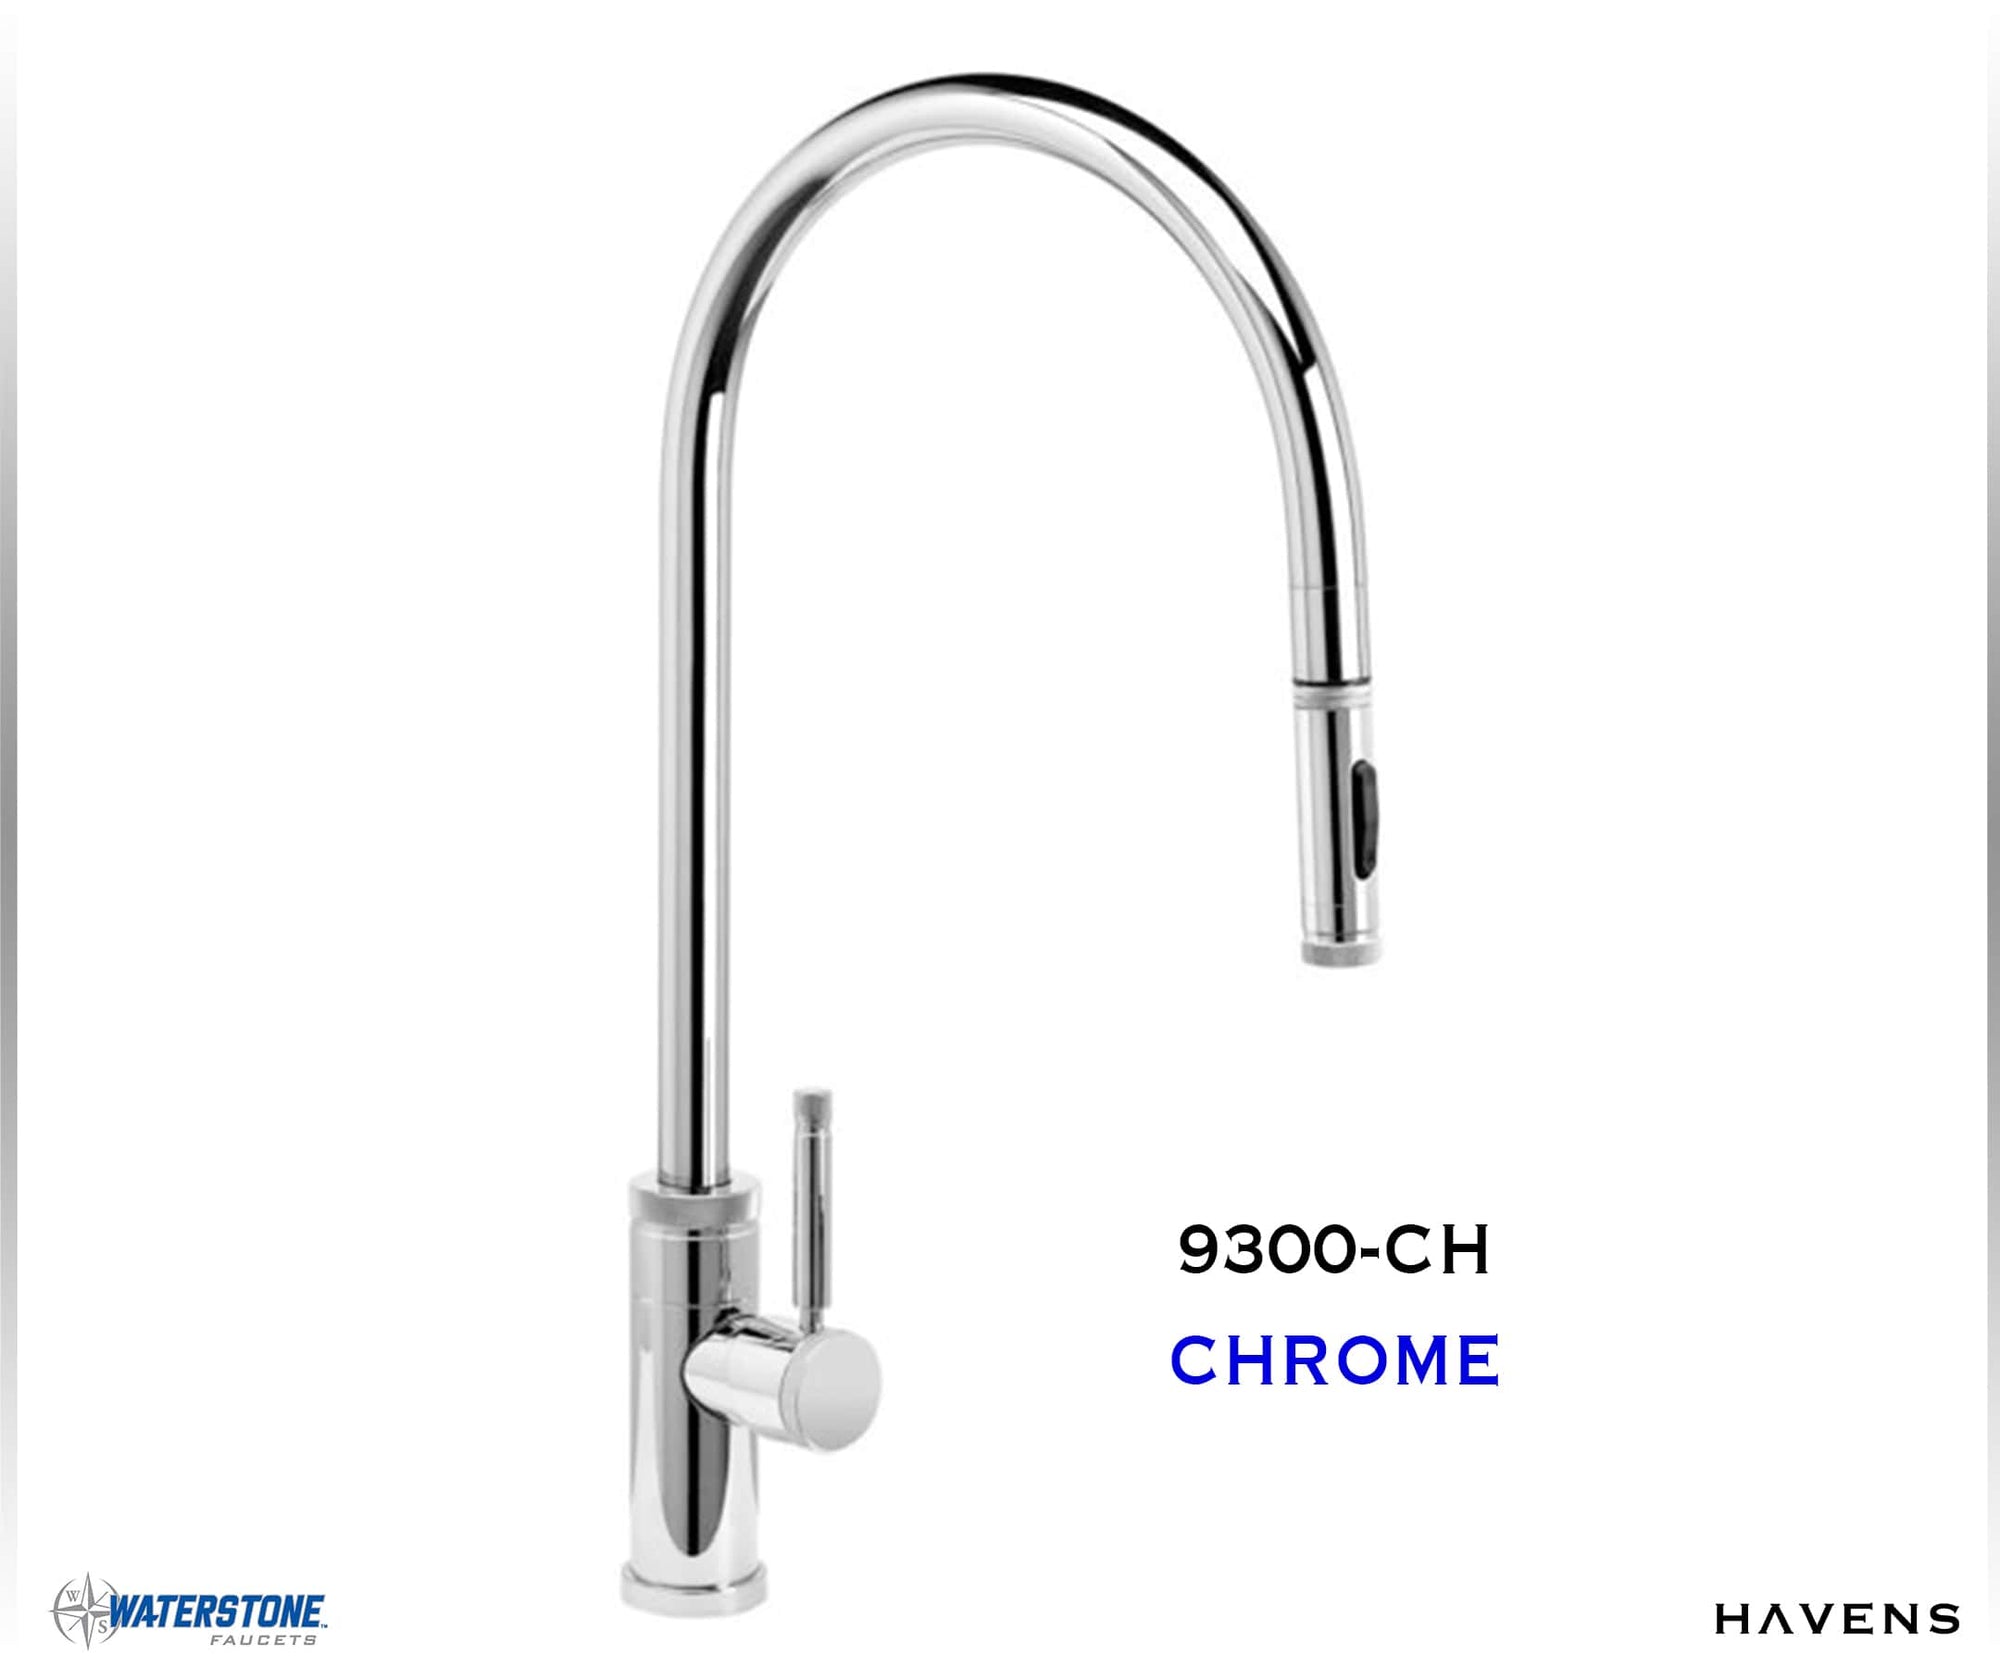 Waterstone Industrial Extended Reach PLP Pulldown Faucet 9300